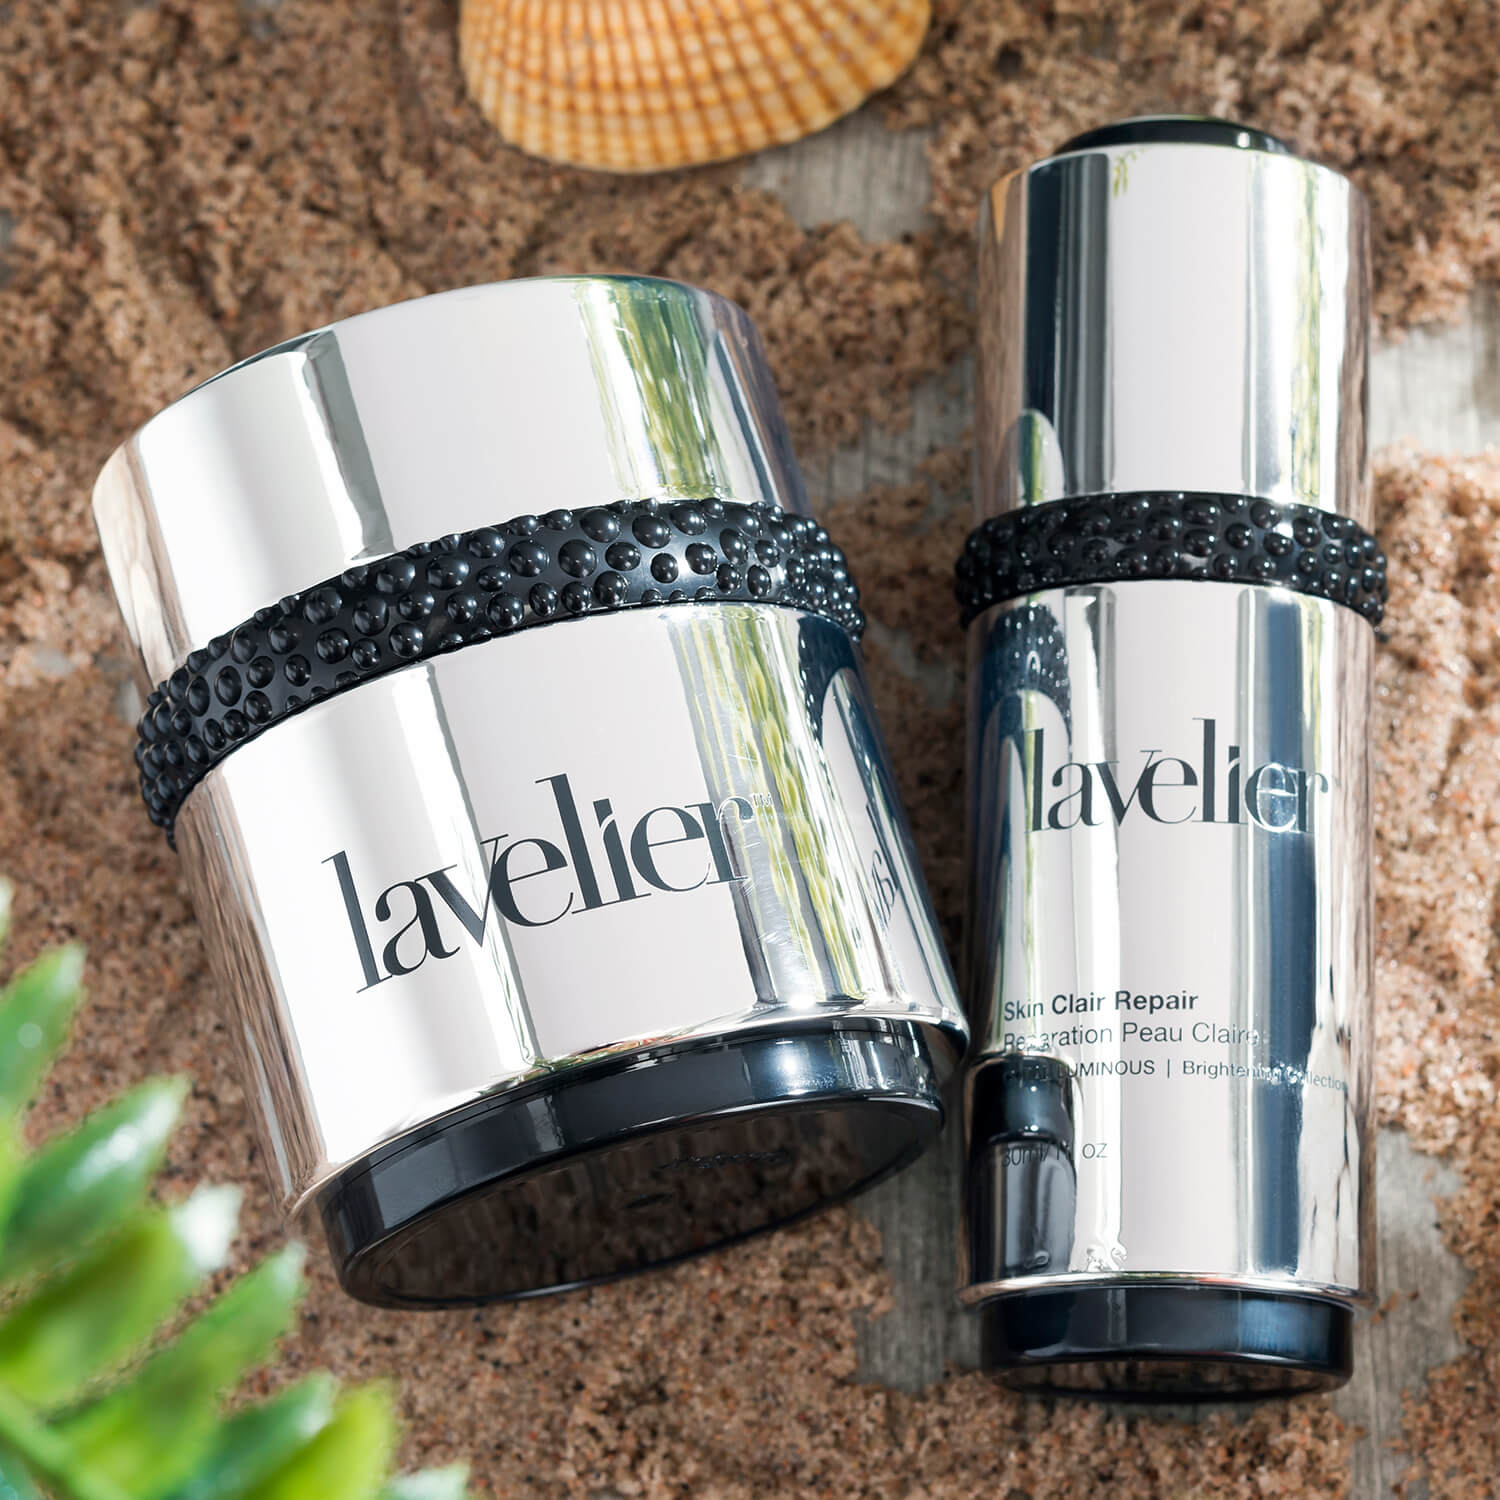 Lavelier skincare products